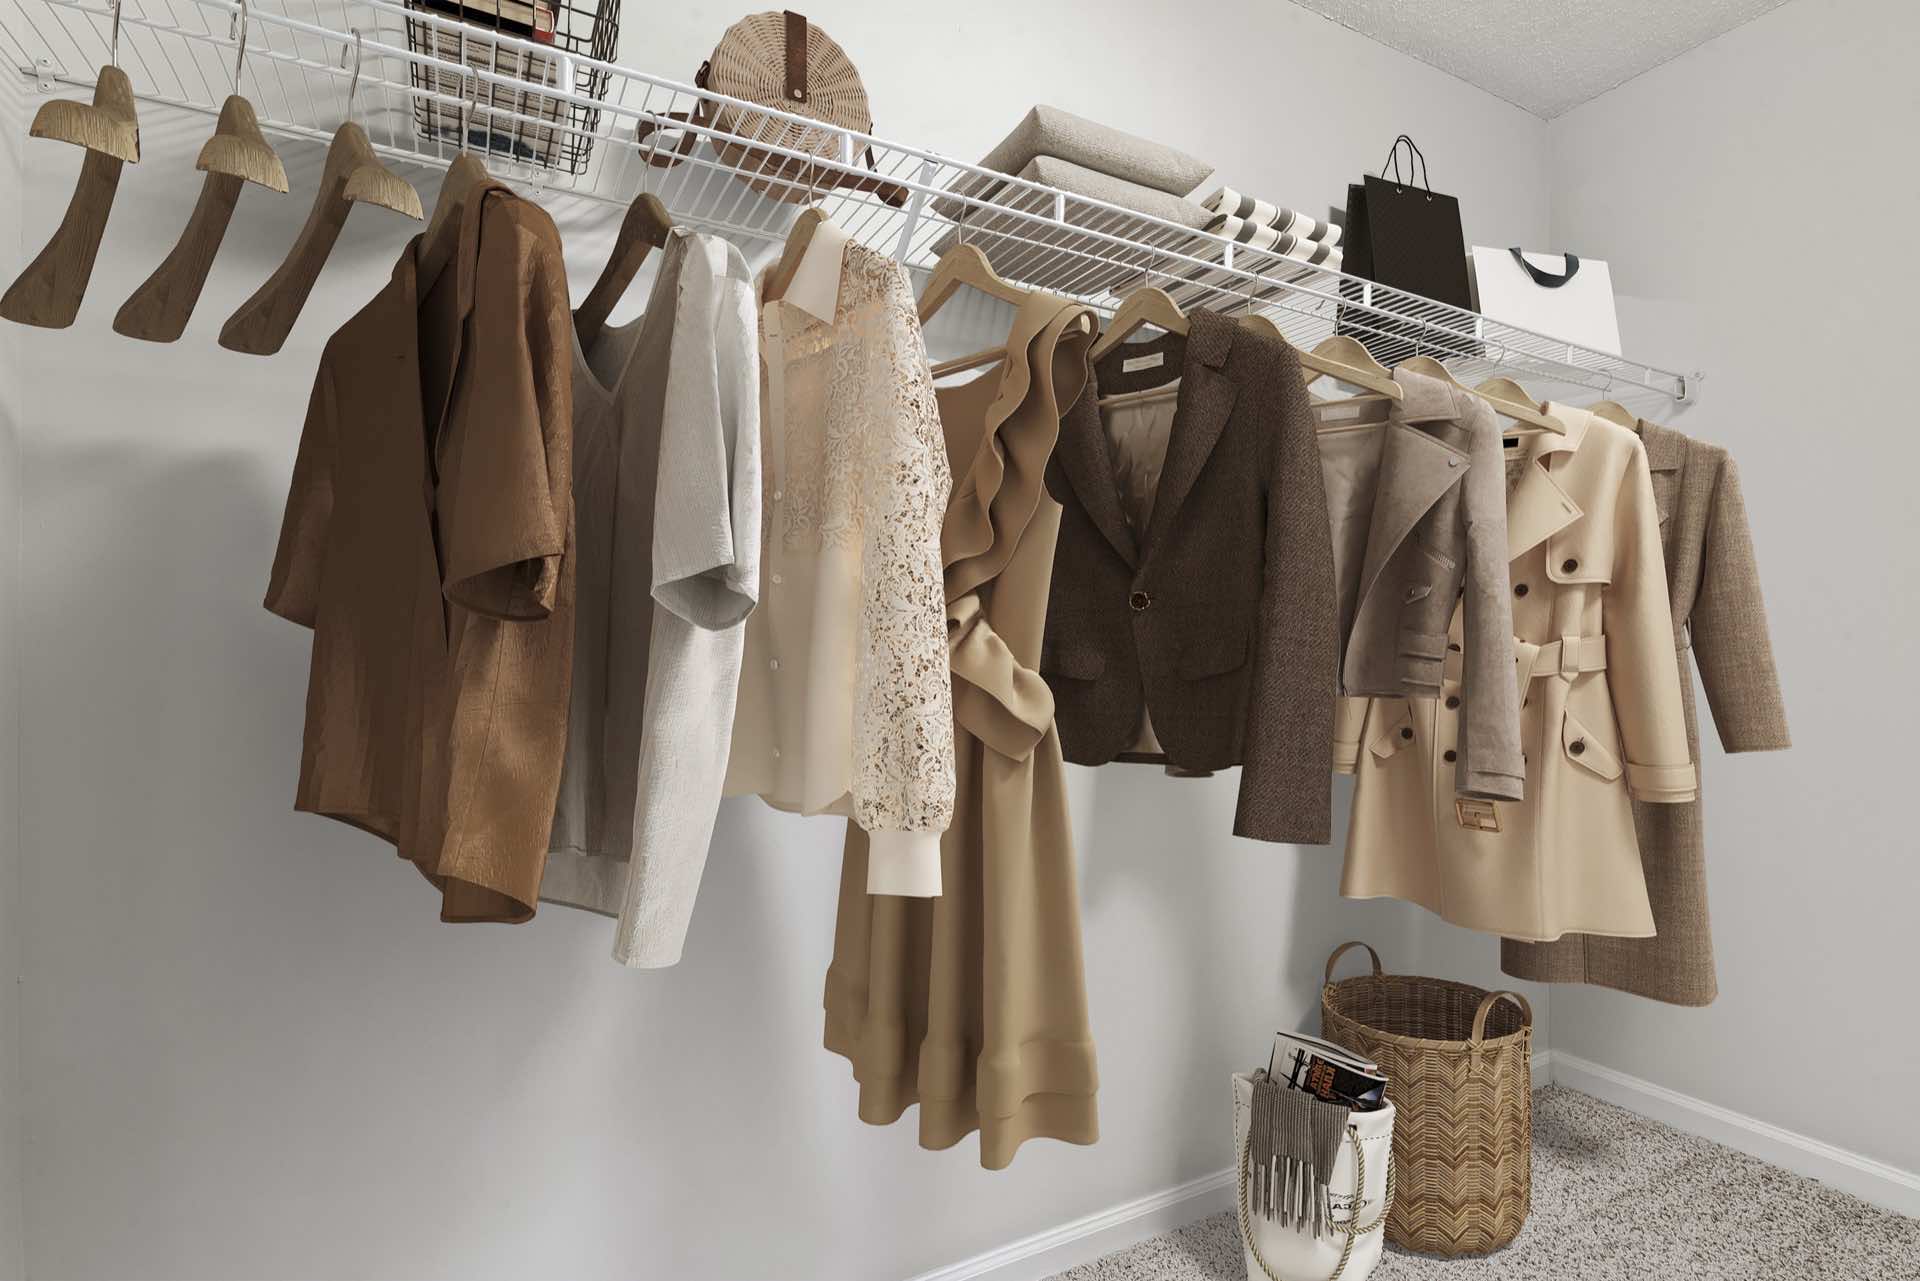 walk-in bedroom closet with white-wire shelving and a small brown-style wardrobe on hangers